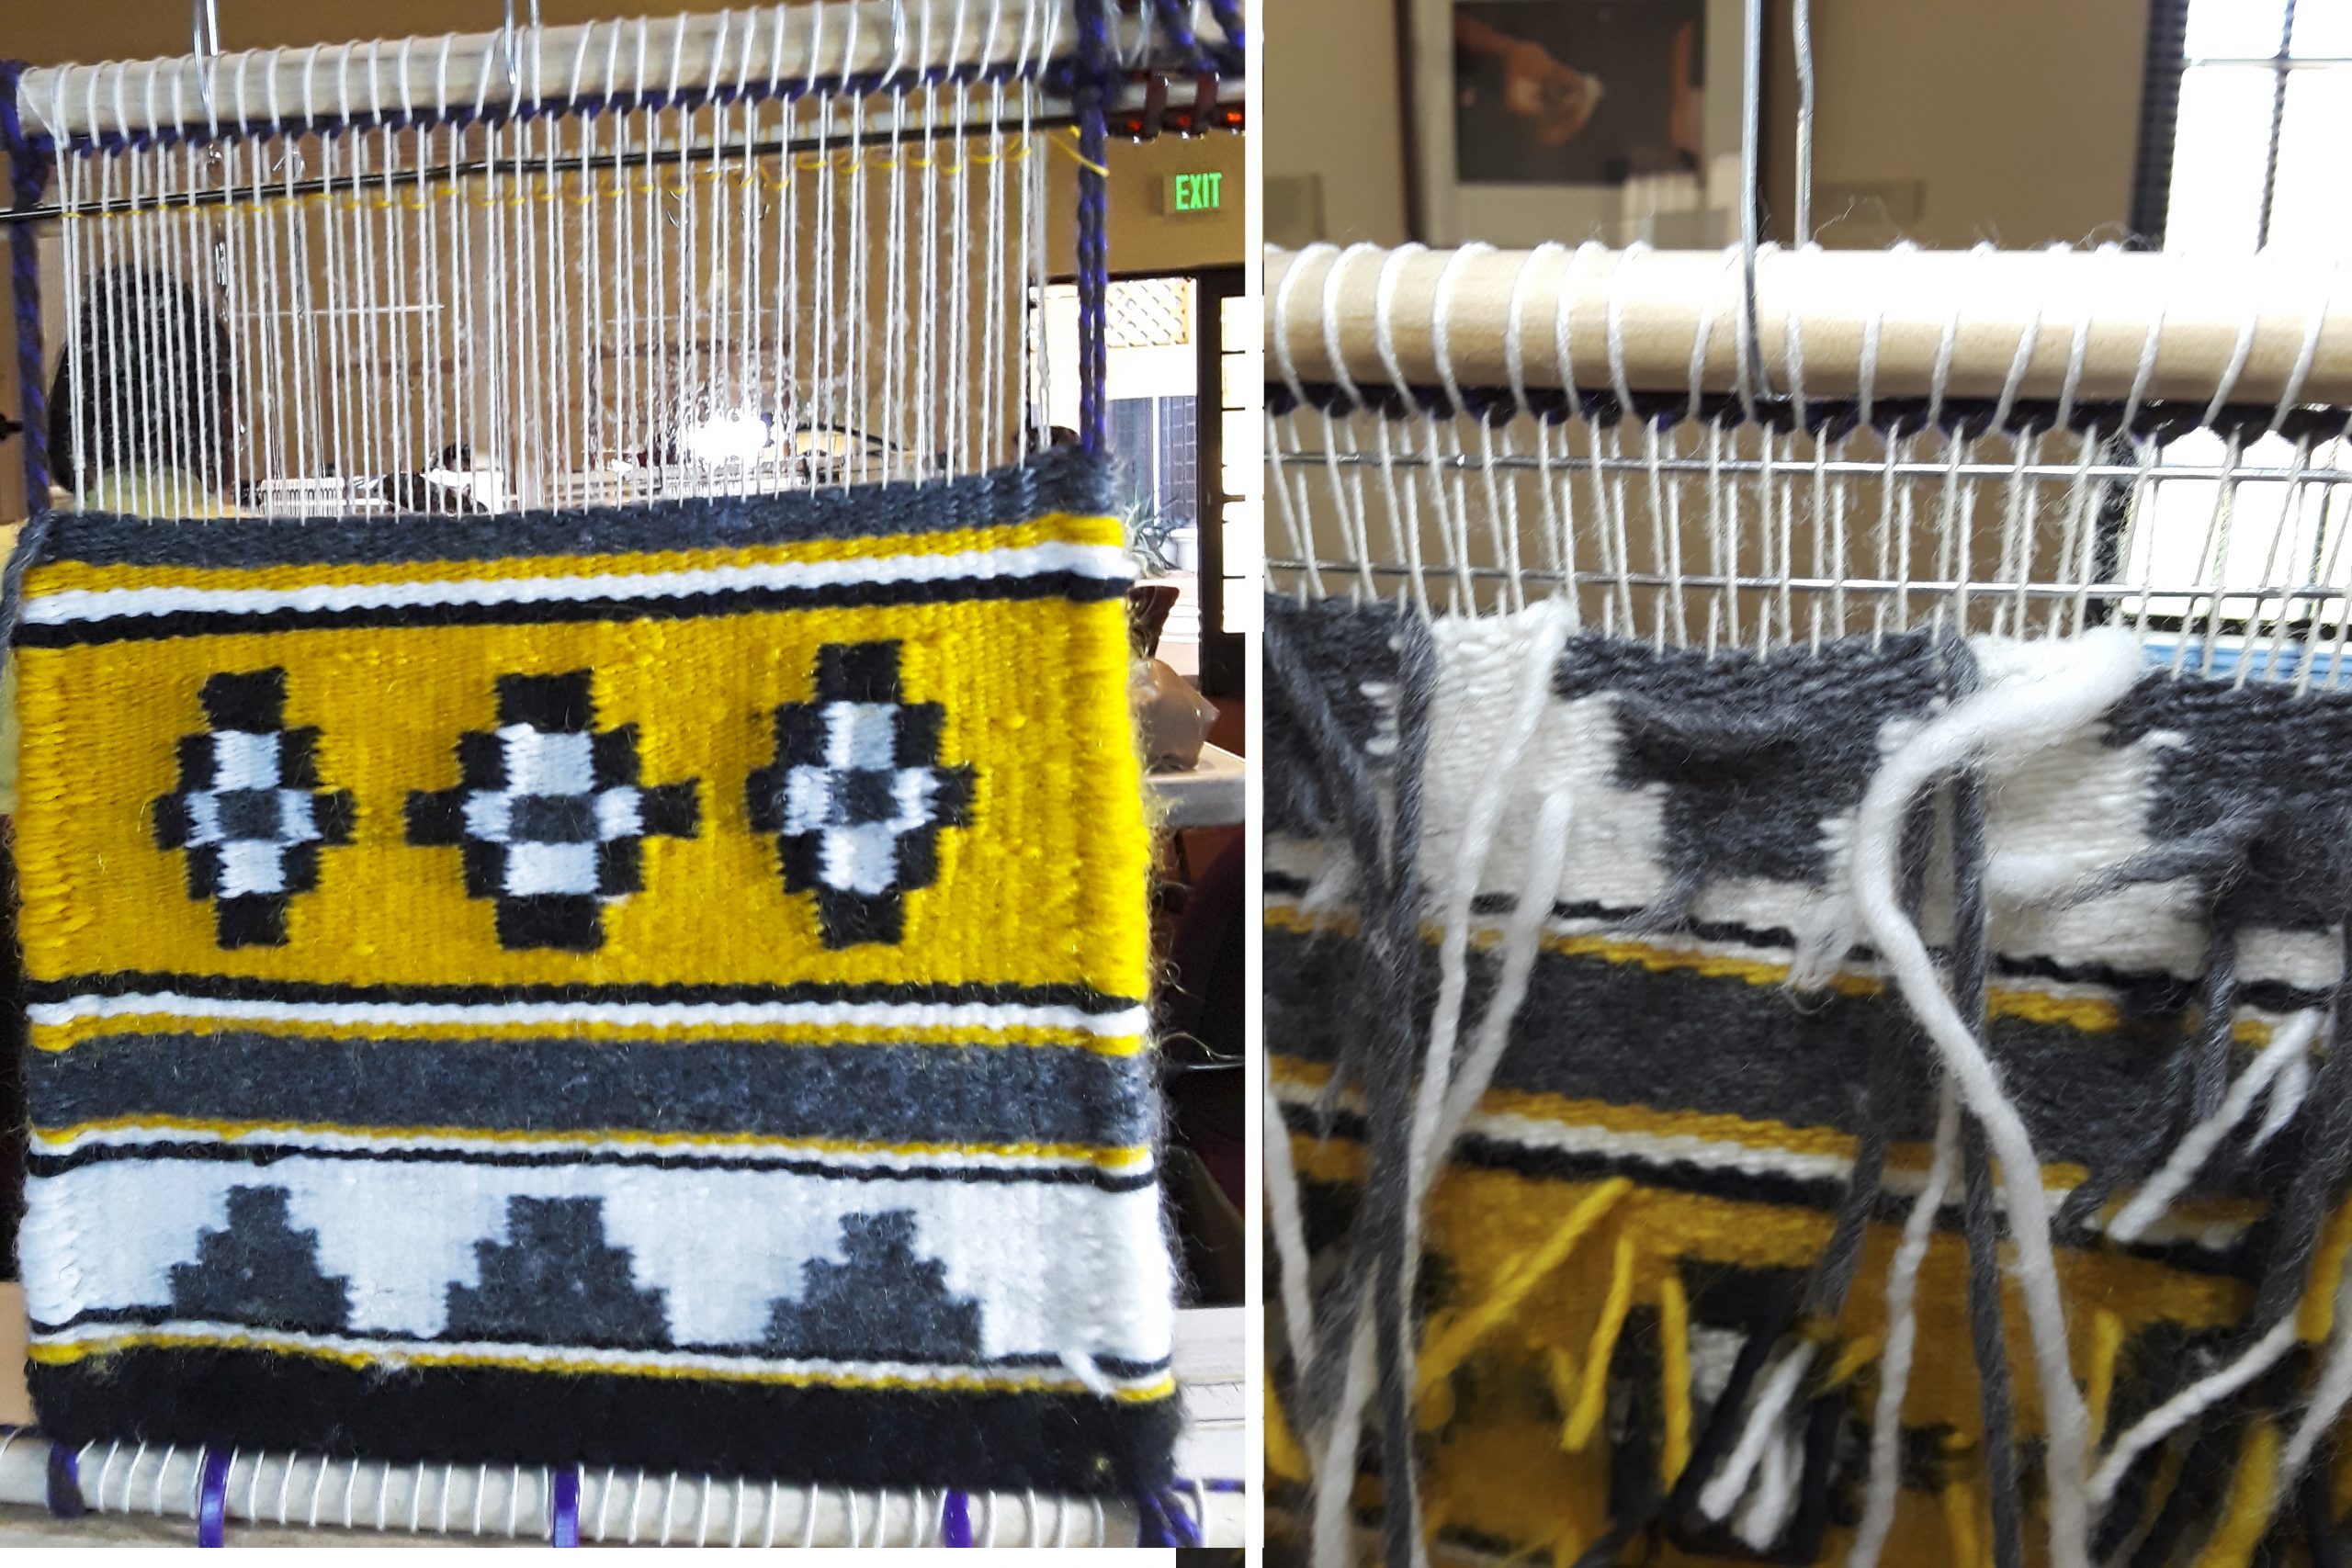 Details of the progress of the design on the loom